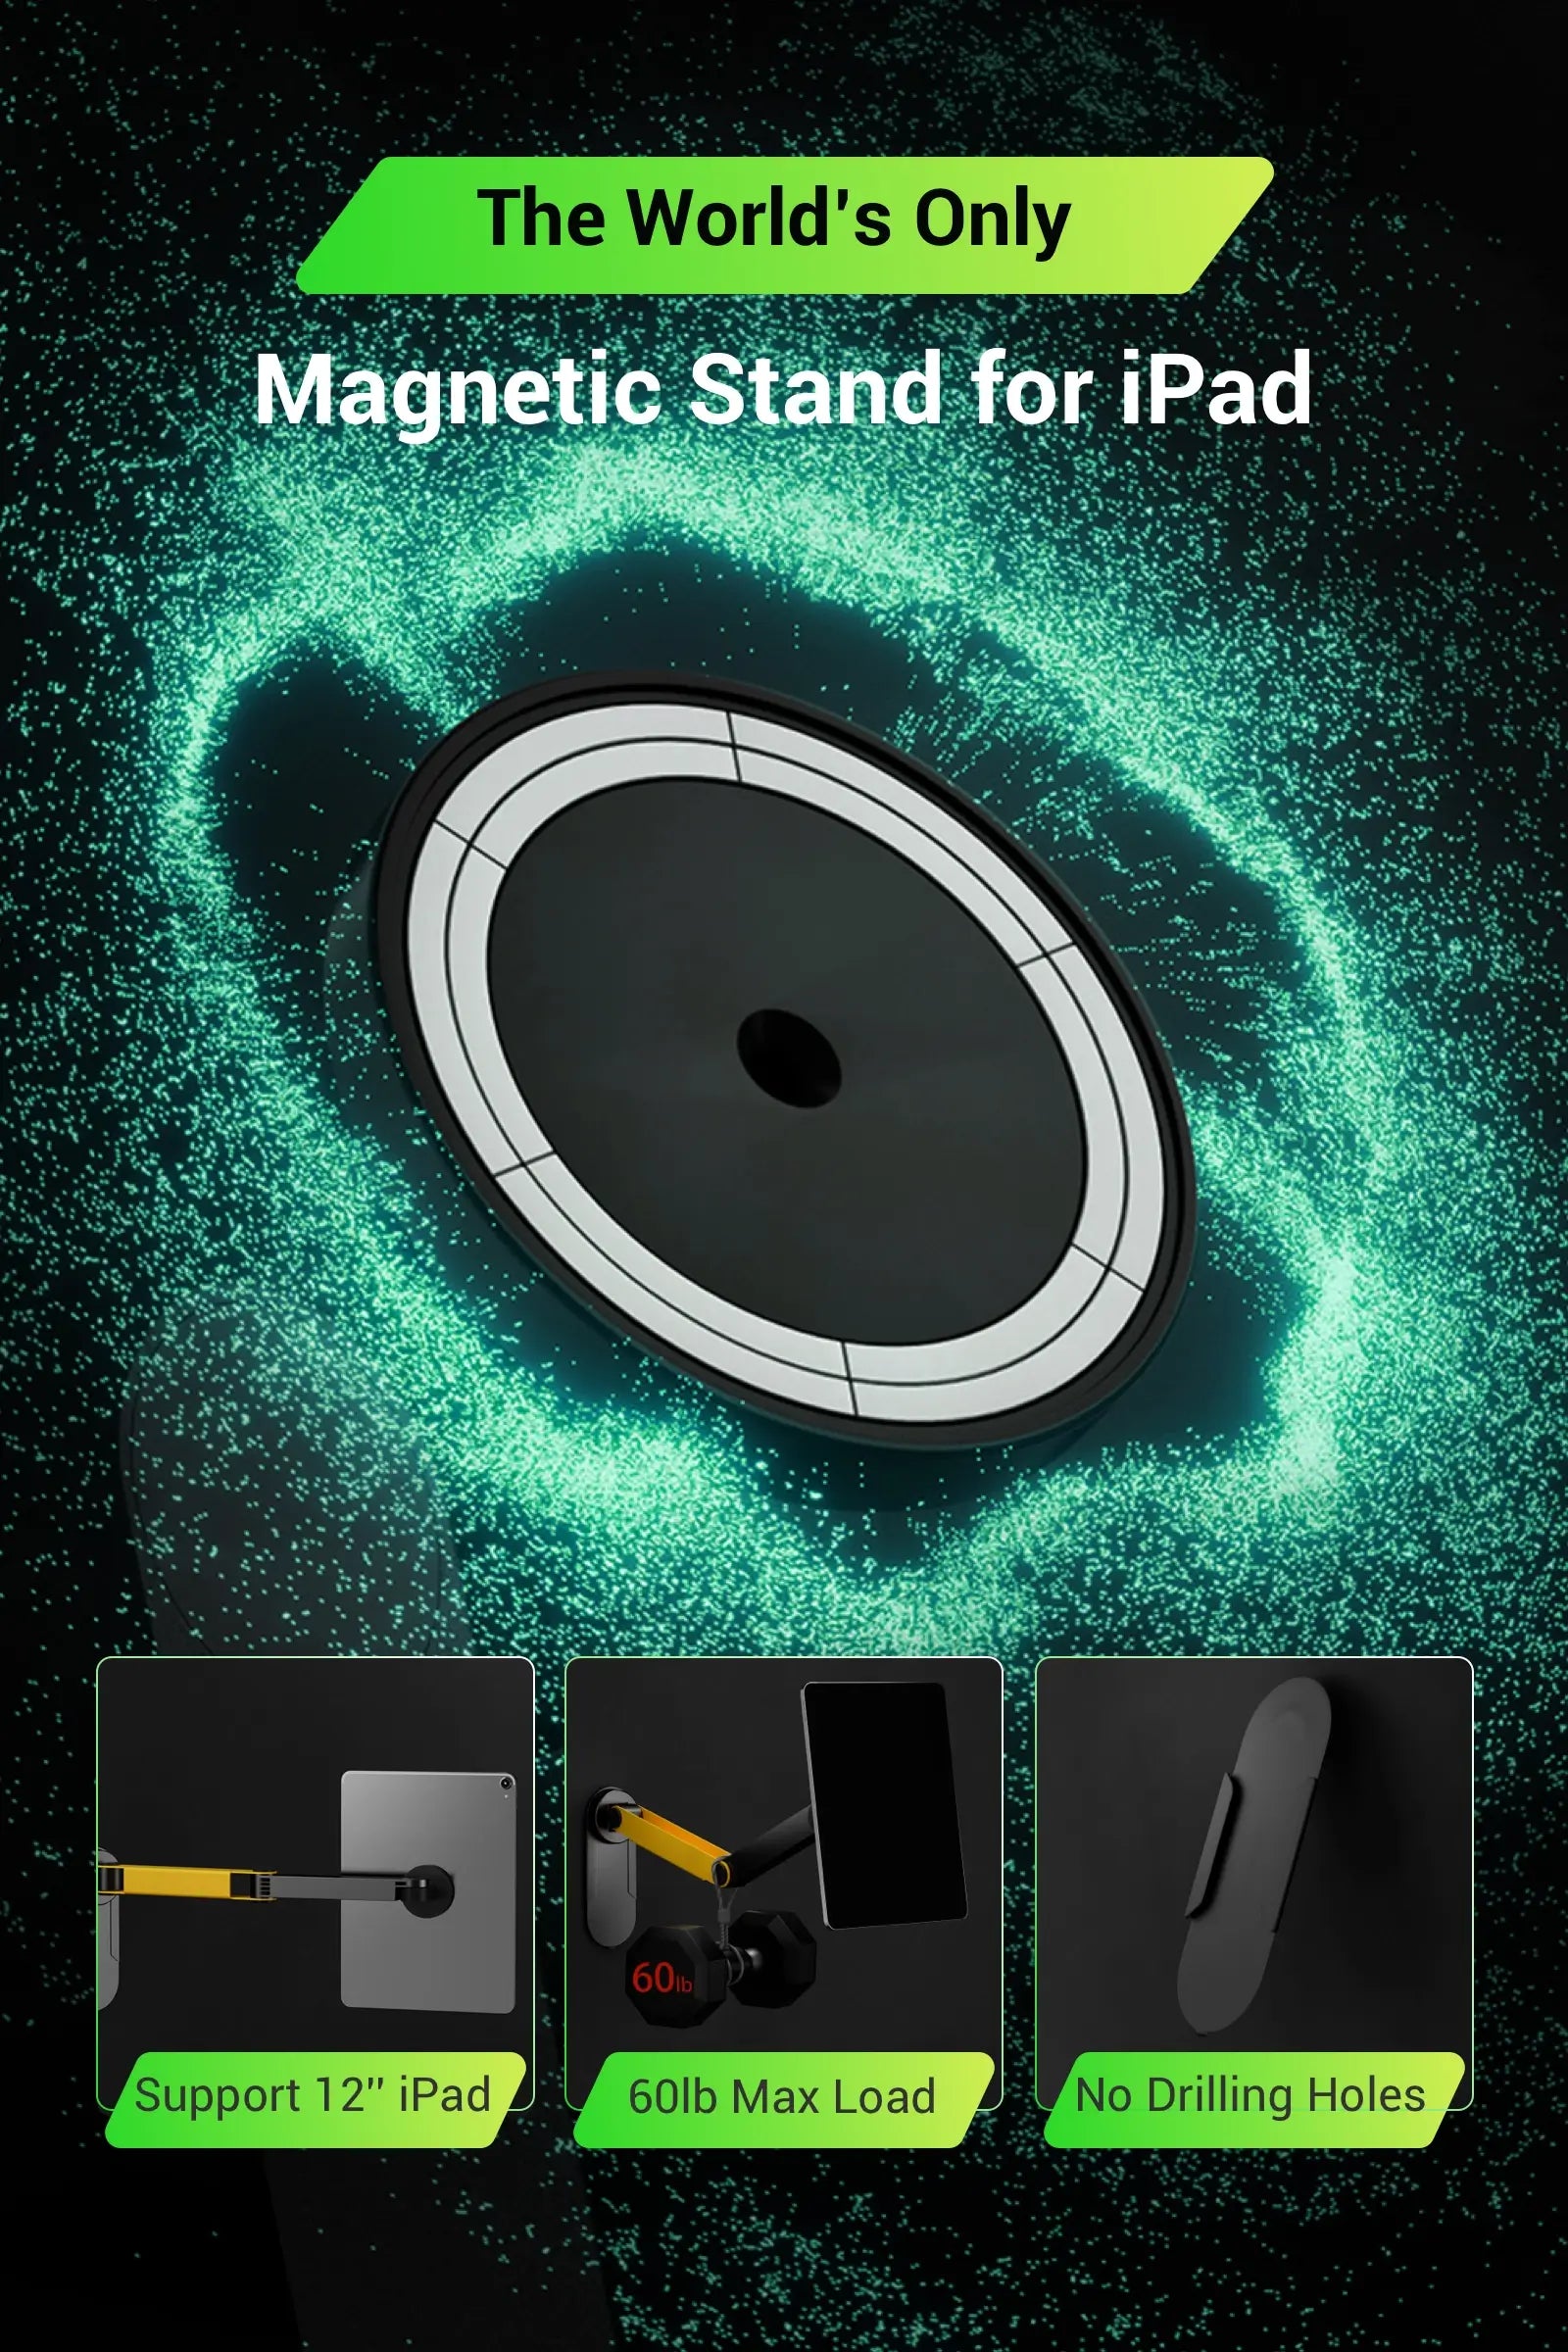 The World’s Only iPad-Magnetic Stand for iPad